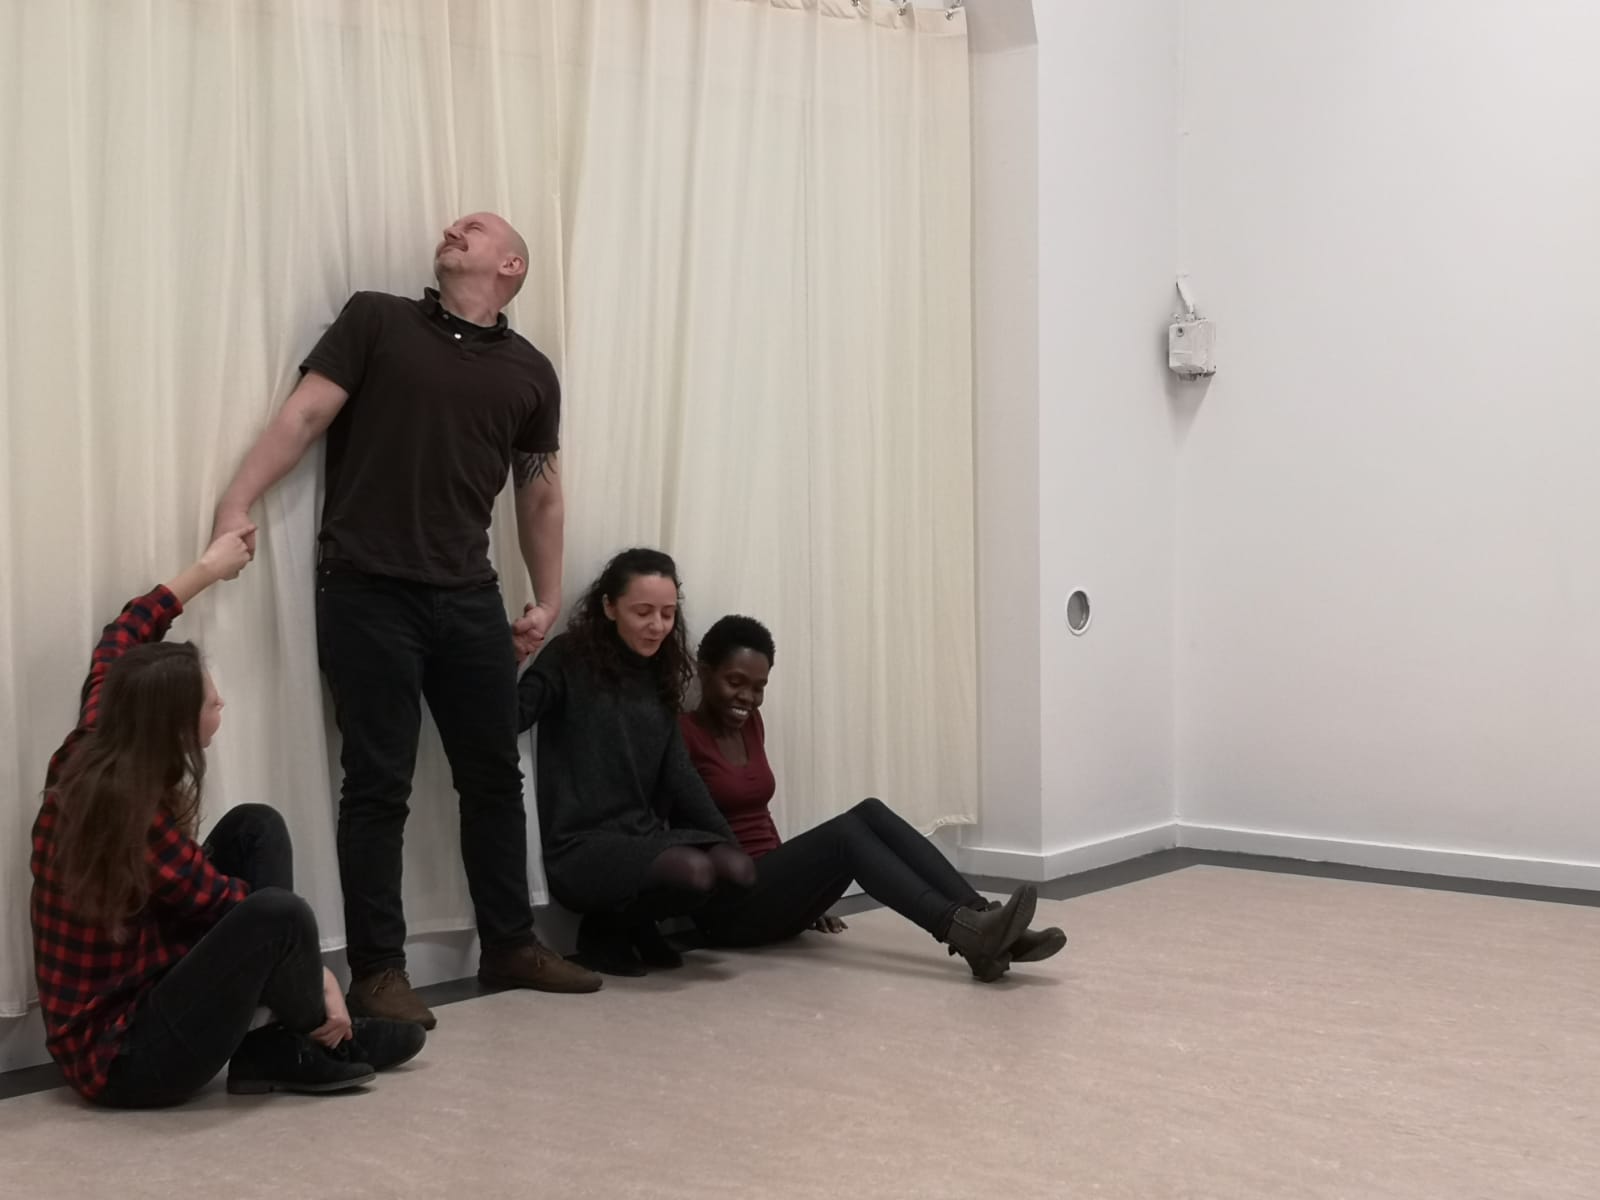 Acting Class Act Attack. Four people, three women, one man, are in a row and have their backs against the wall. The women sit on the floor. Two of them hold hands with the man who is standing